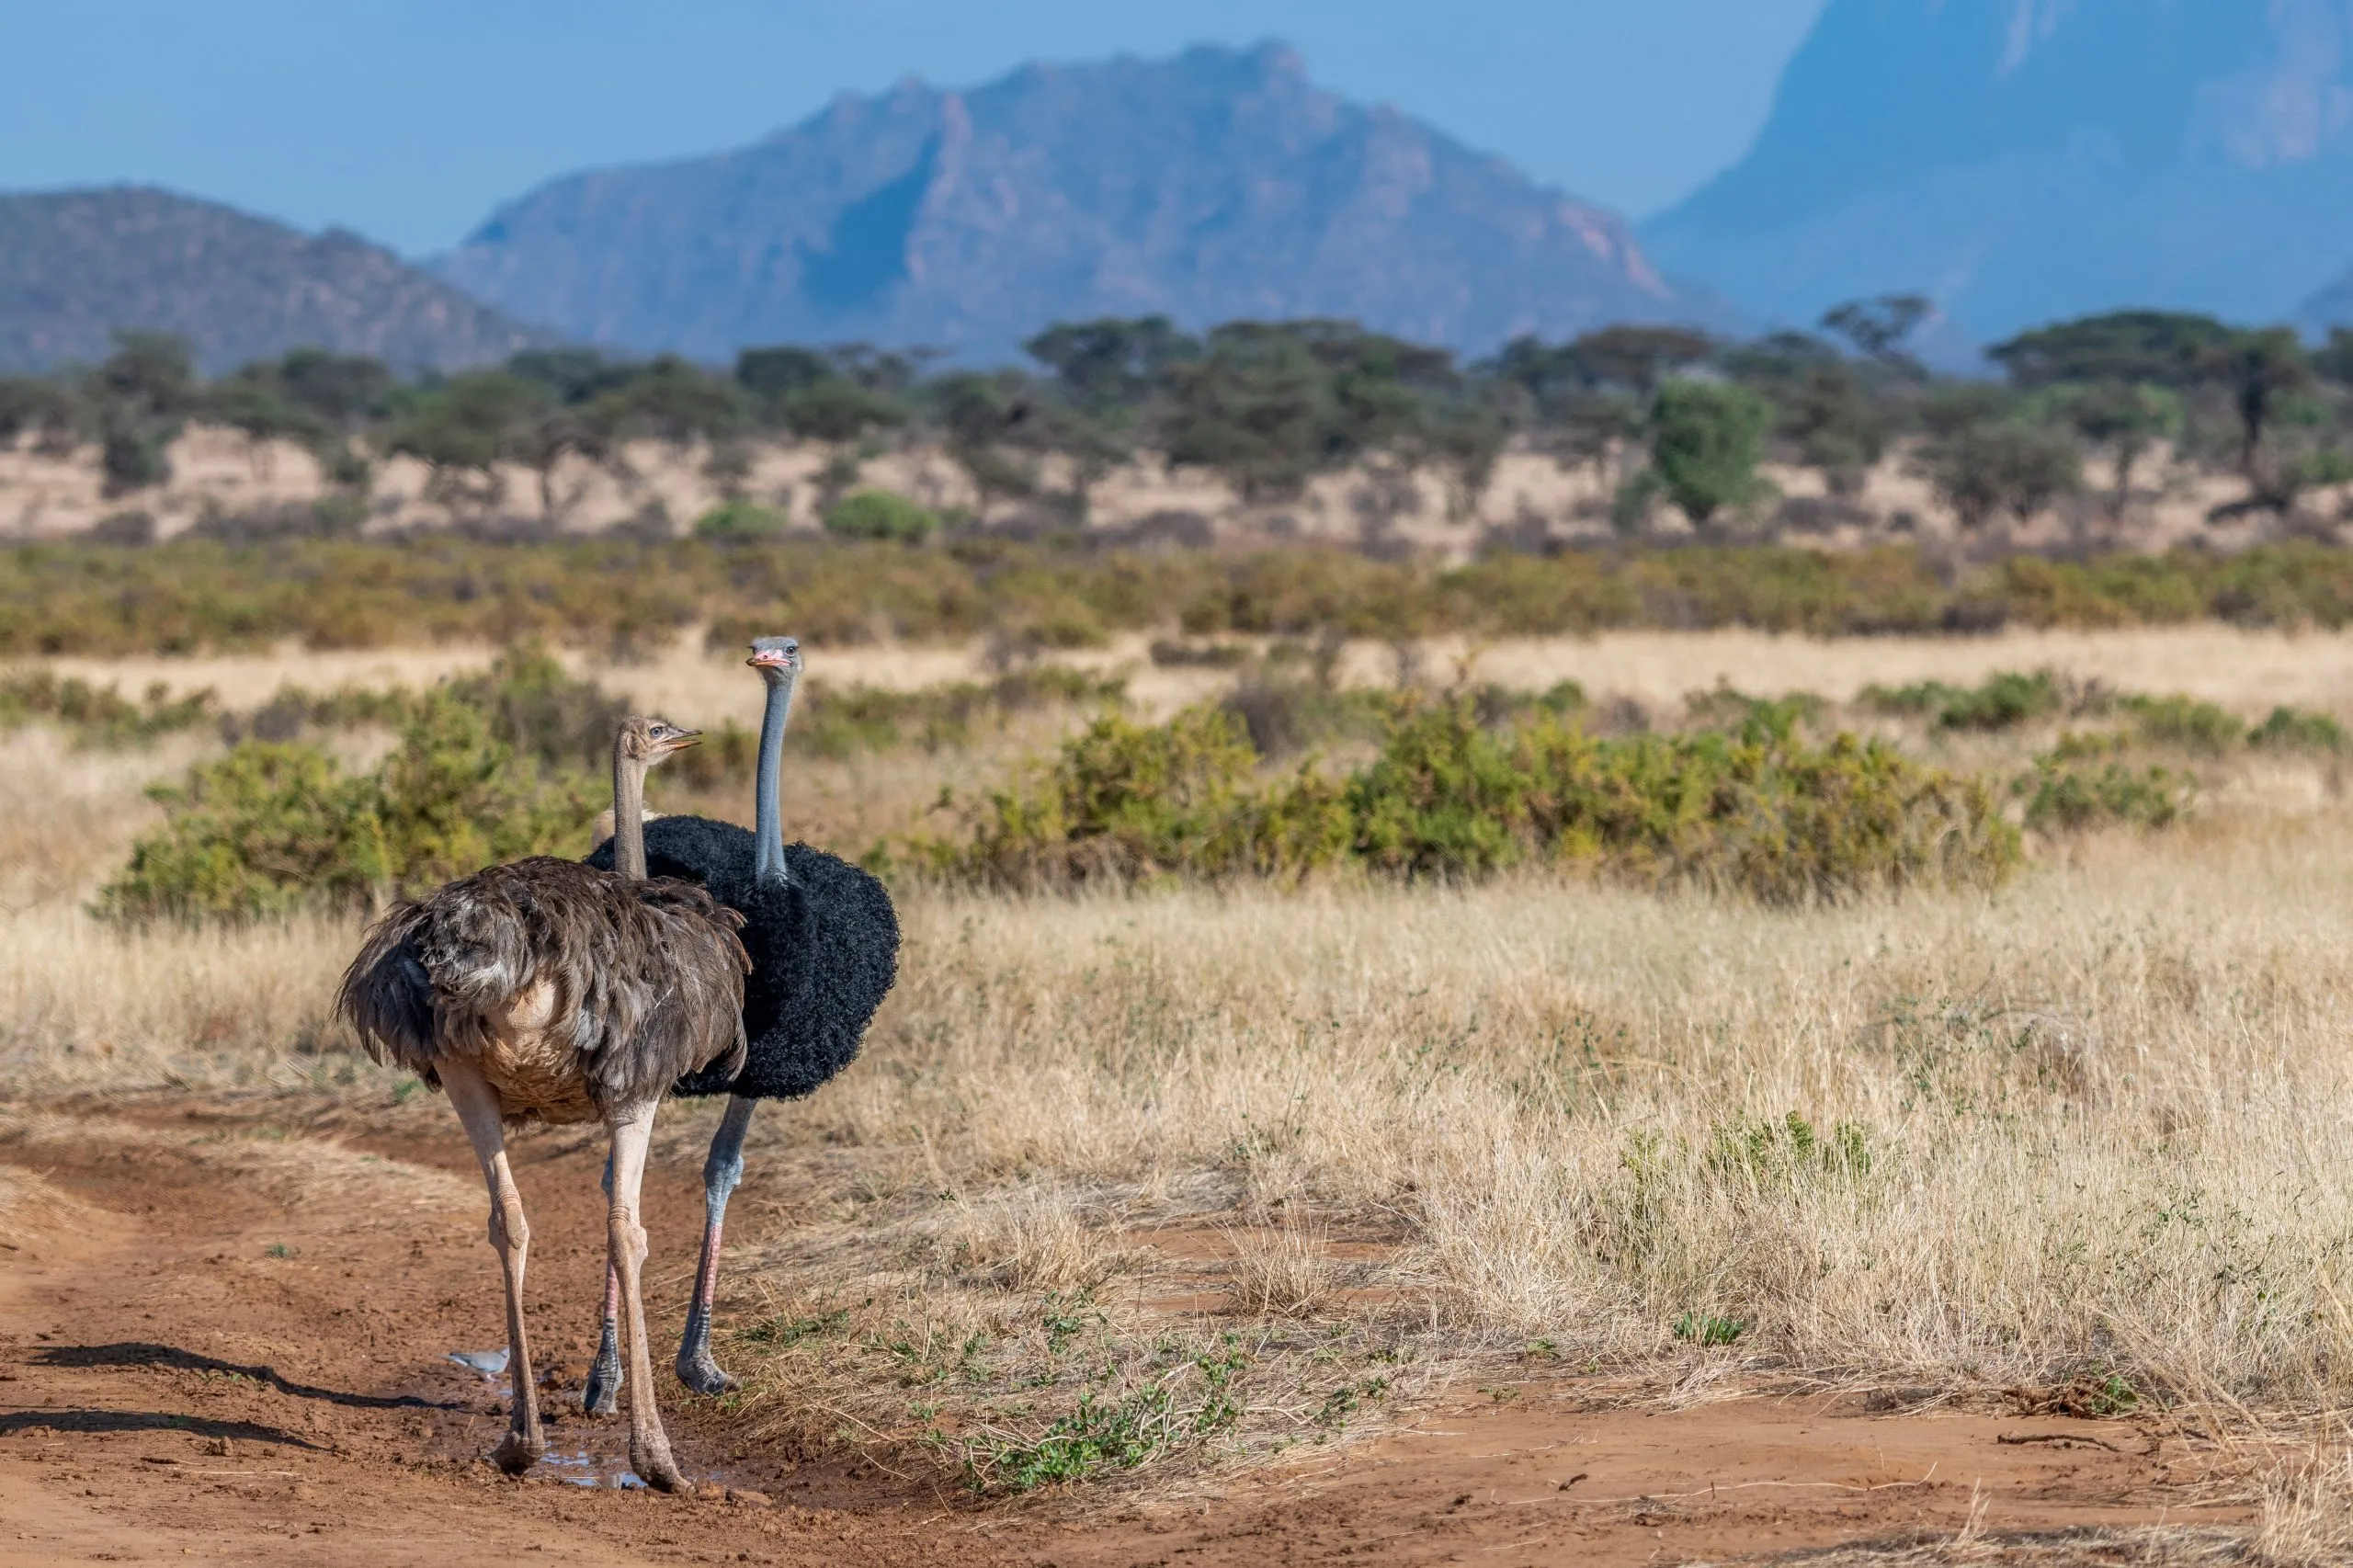 Semi arid landscape at Samburu National Reserve, Kenya. Rare male and female Somali Ostrich in the foreground. A mating pair. The neck and thigh skin color is grey blue. Huge flightless bird. Africa.